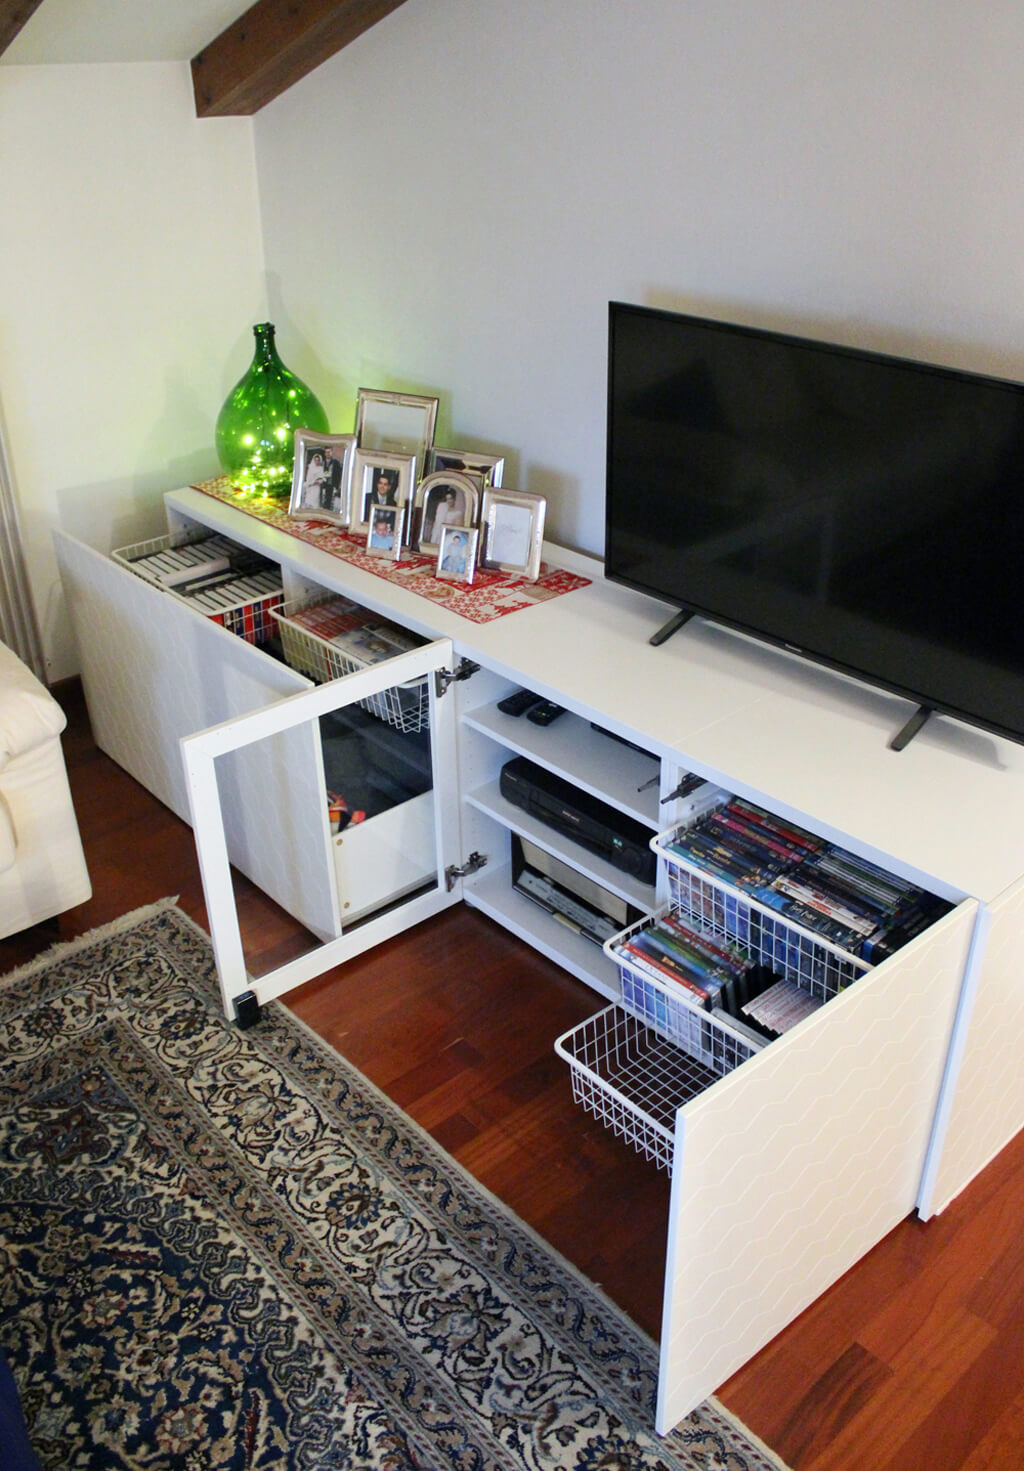 White TV stand with pretty hexagon patterns